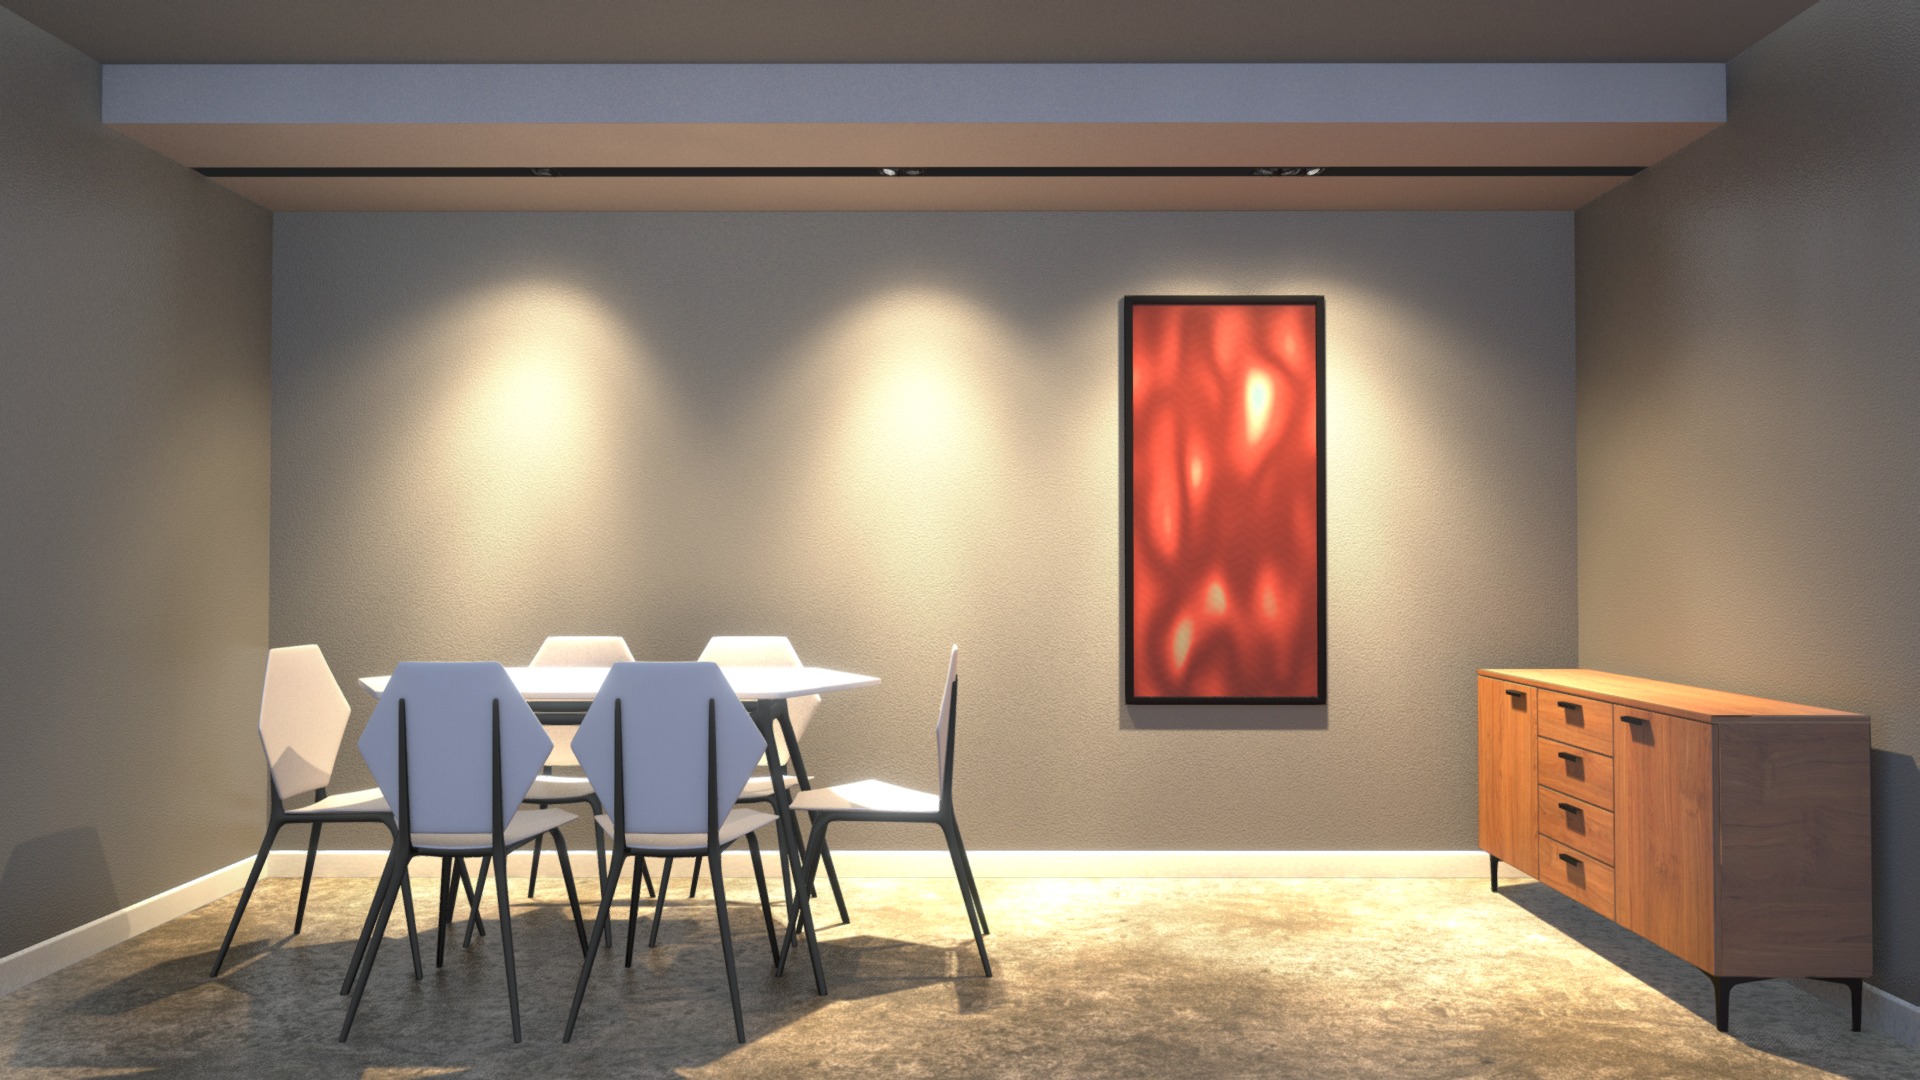 3D model Azzardo paco set of 3 ceiling lamps, IES data - This is a 3D model of the Azzardo paco set of 3 ceiling lamps, IES data. The 3D model is about a room with a table and chairs.